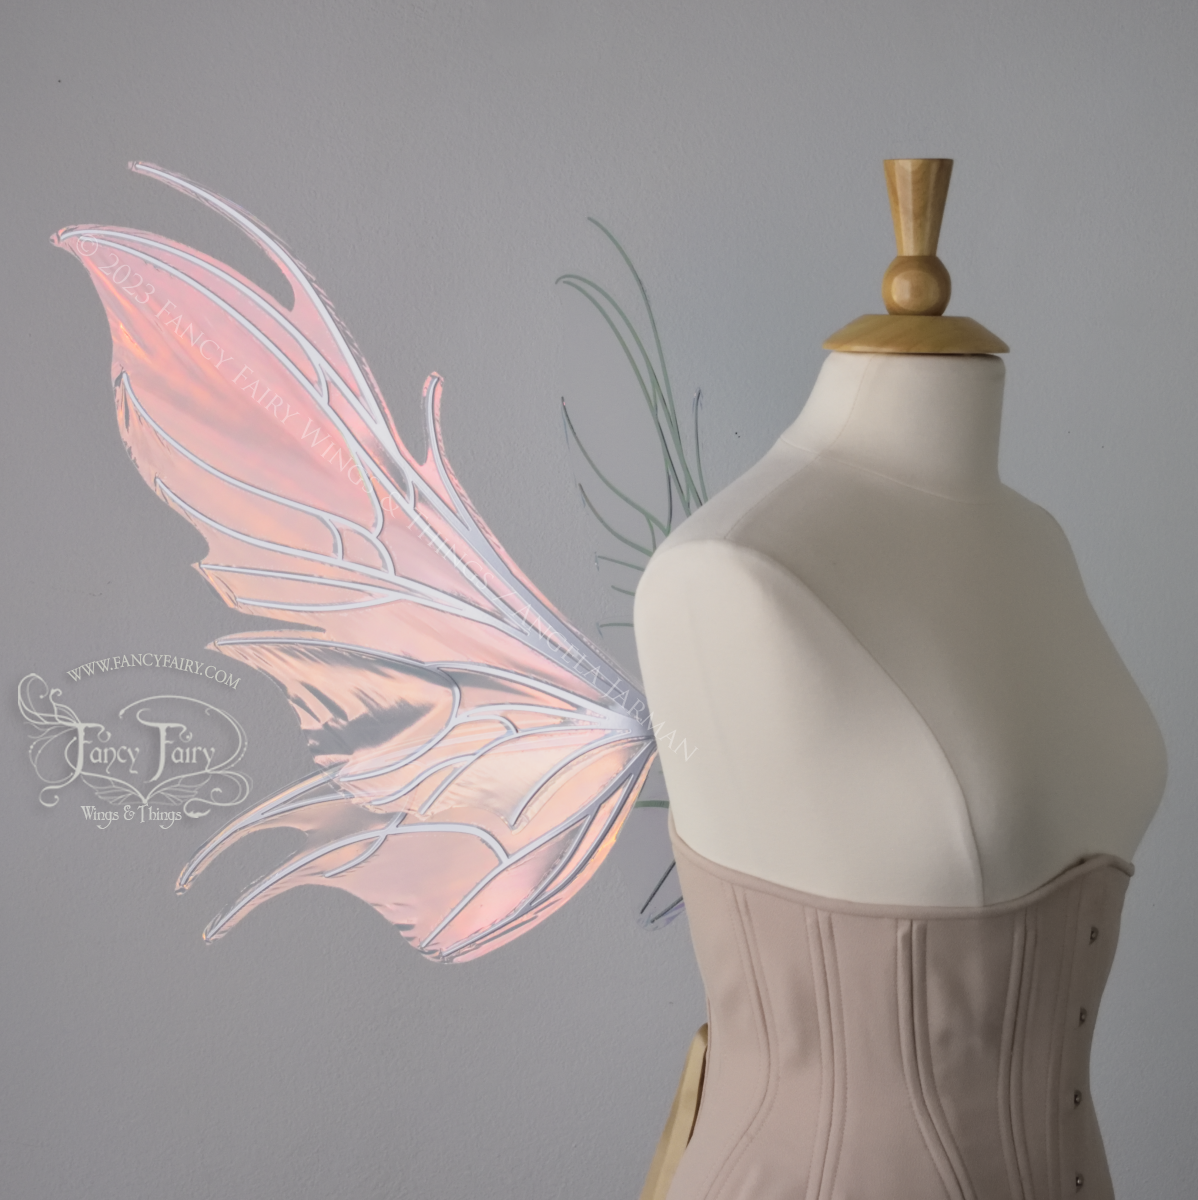 Left side view of iridescent pink / orange fairy wings with spikey silver veins, worn by a dress form